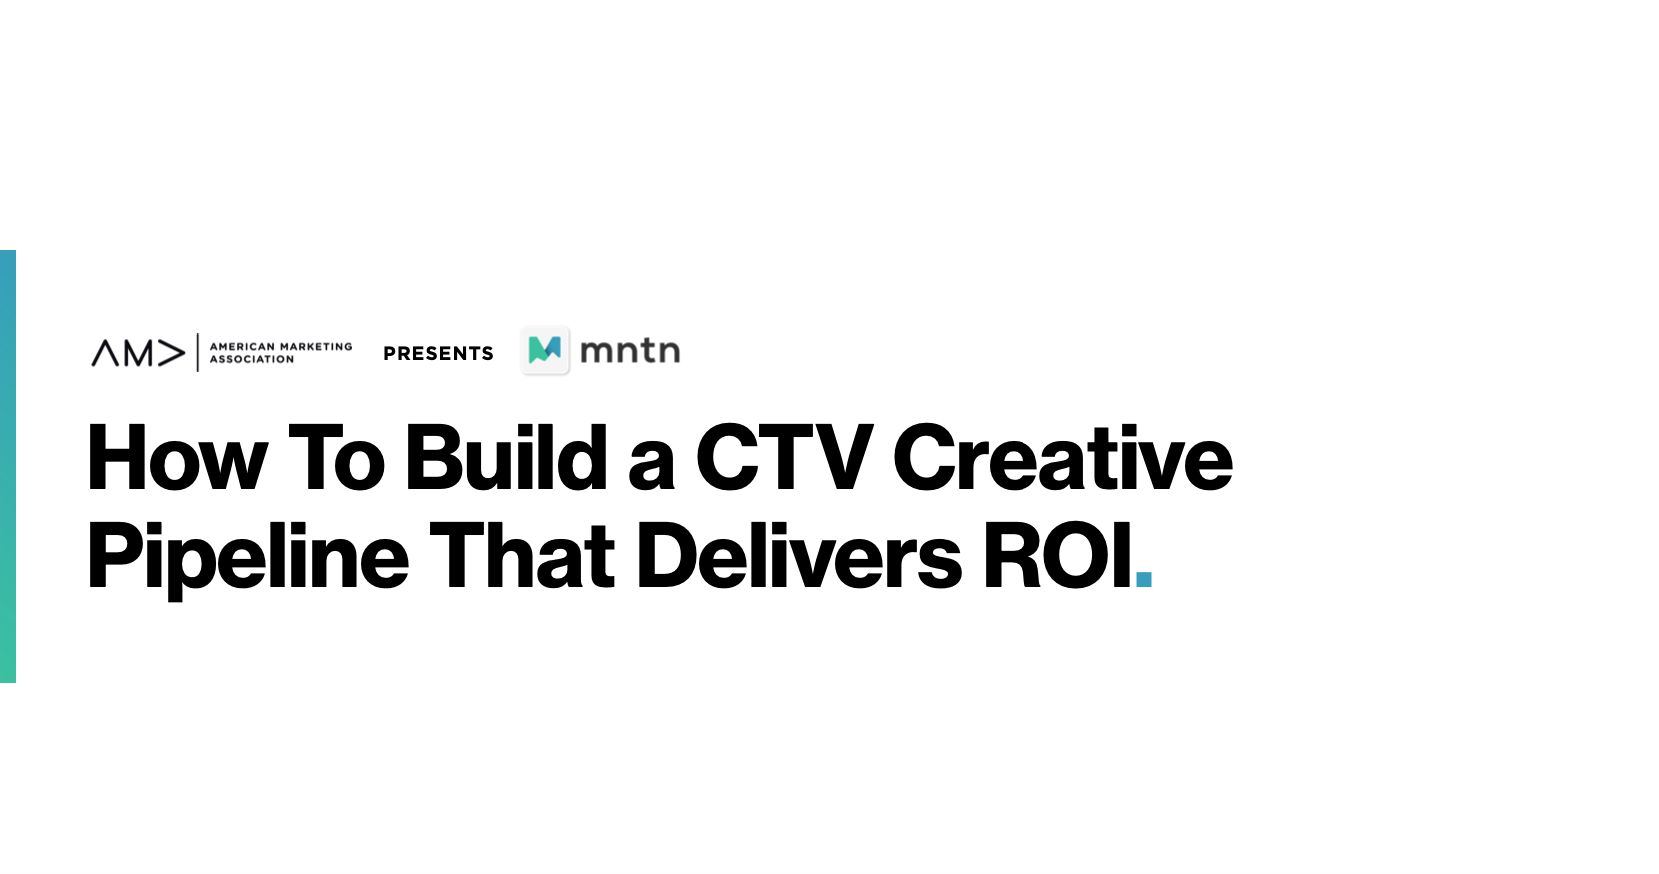 How to Build a CTV Creative Pipeline That Delivers ROI